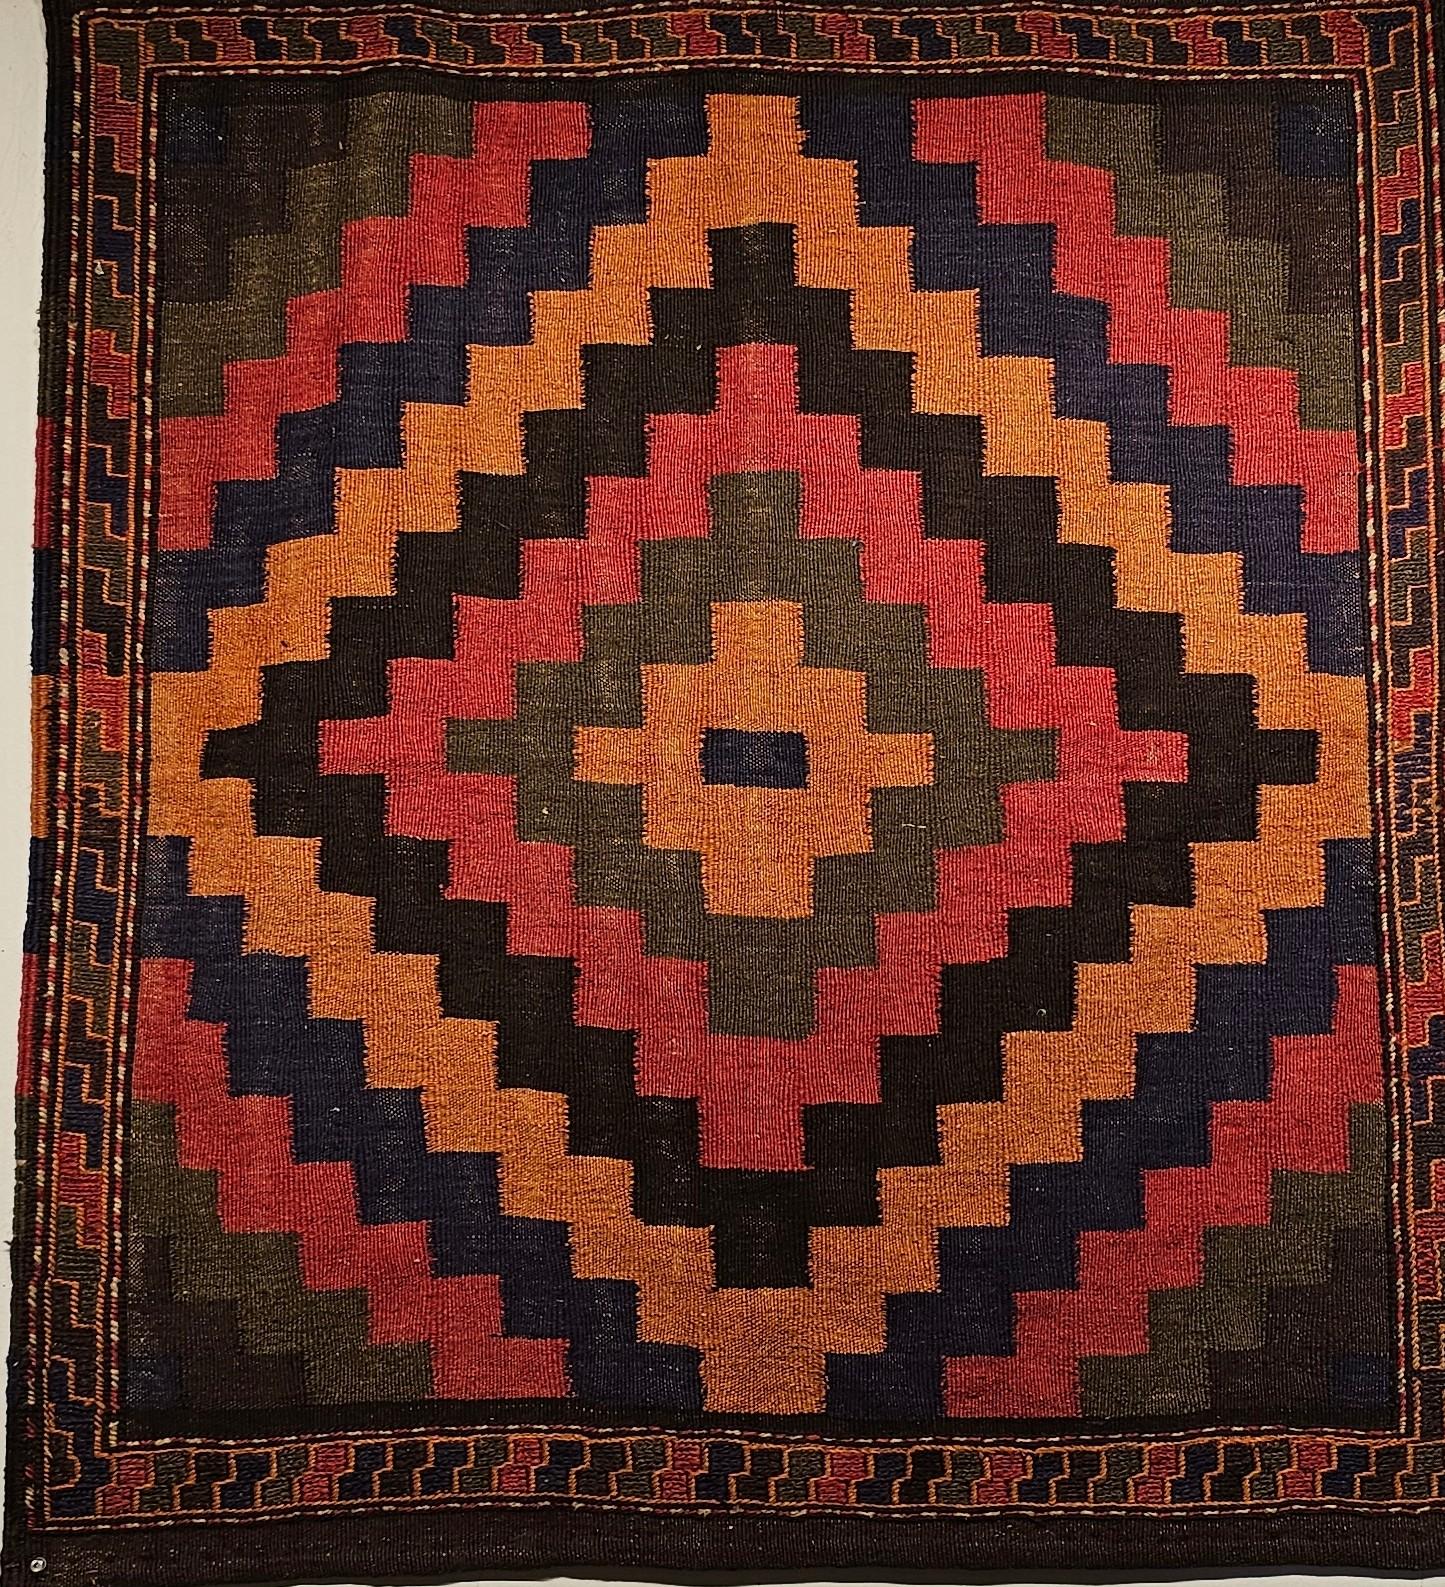  A very rare Persian  sofreh tribal Kilim from the mid 1900s.  The handwoven tribal kilim is from the Qashqai tribes in Southwest Persia.  It is a very desirable square-size tribal kilim with natural organic dyes.  The sofreh kilim was mostly woven